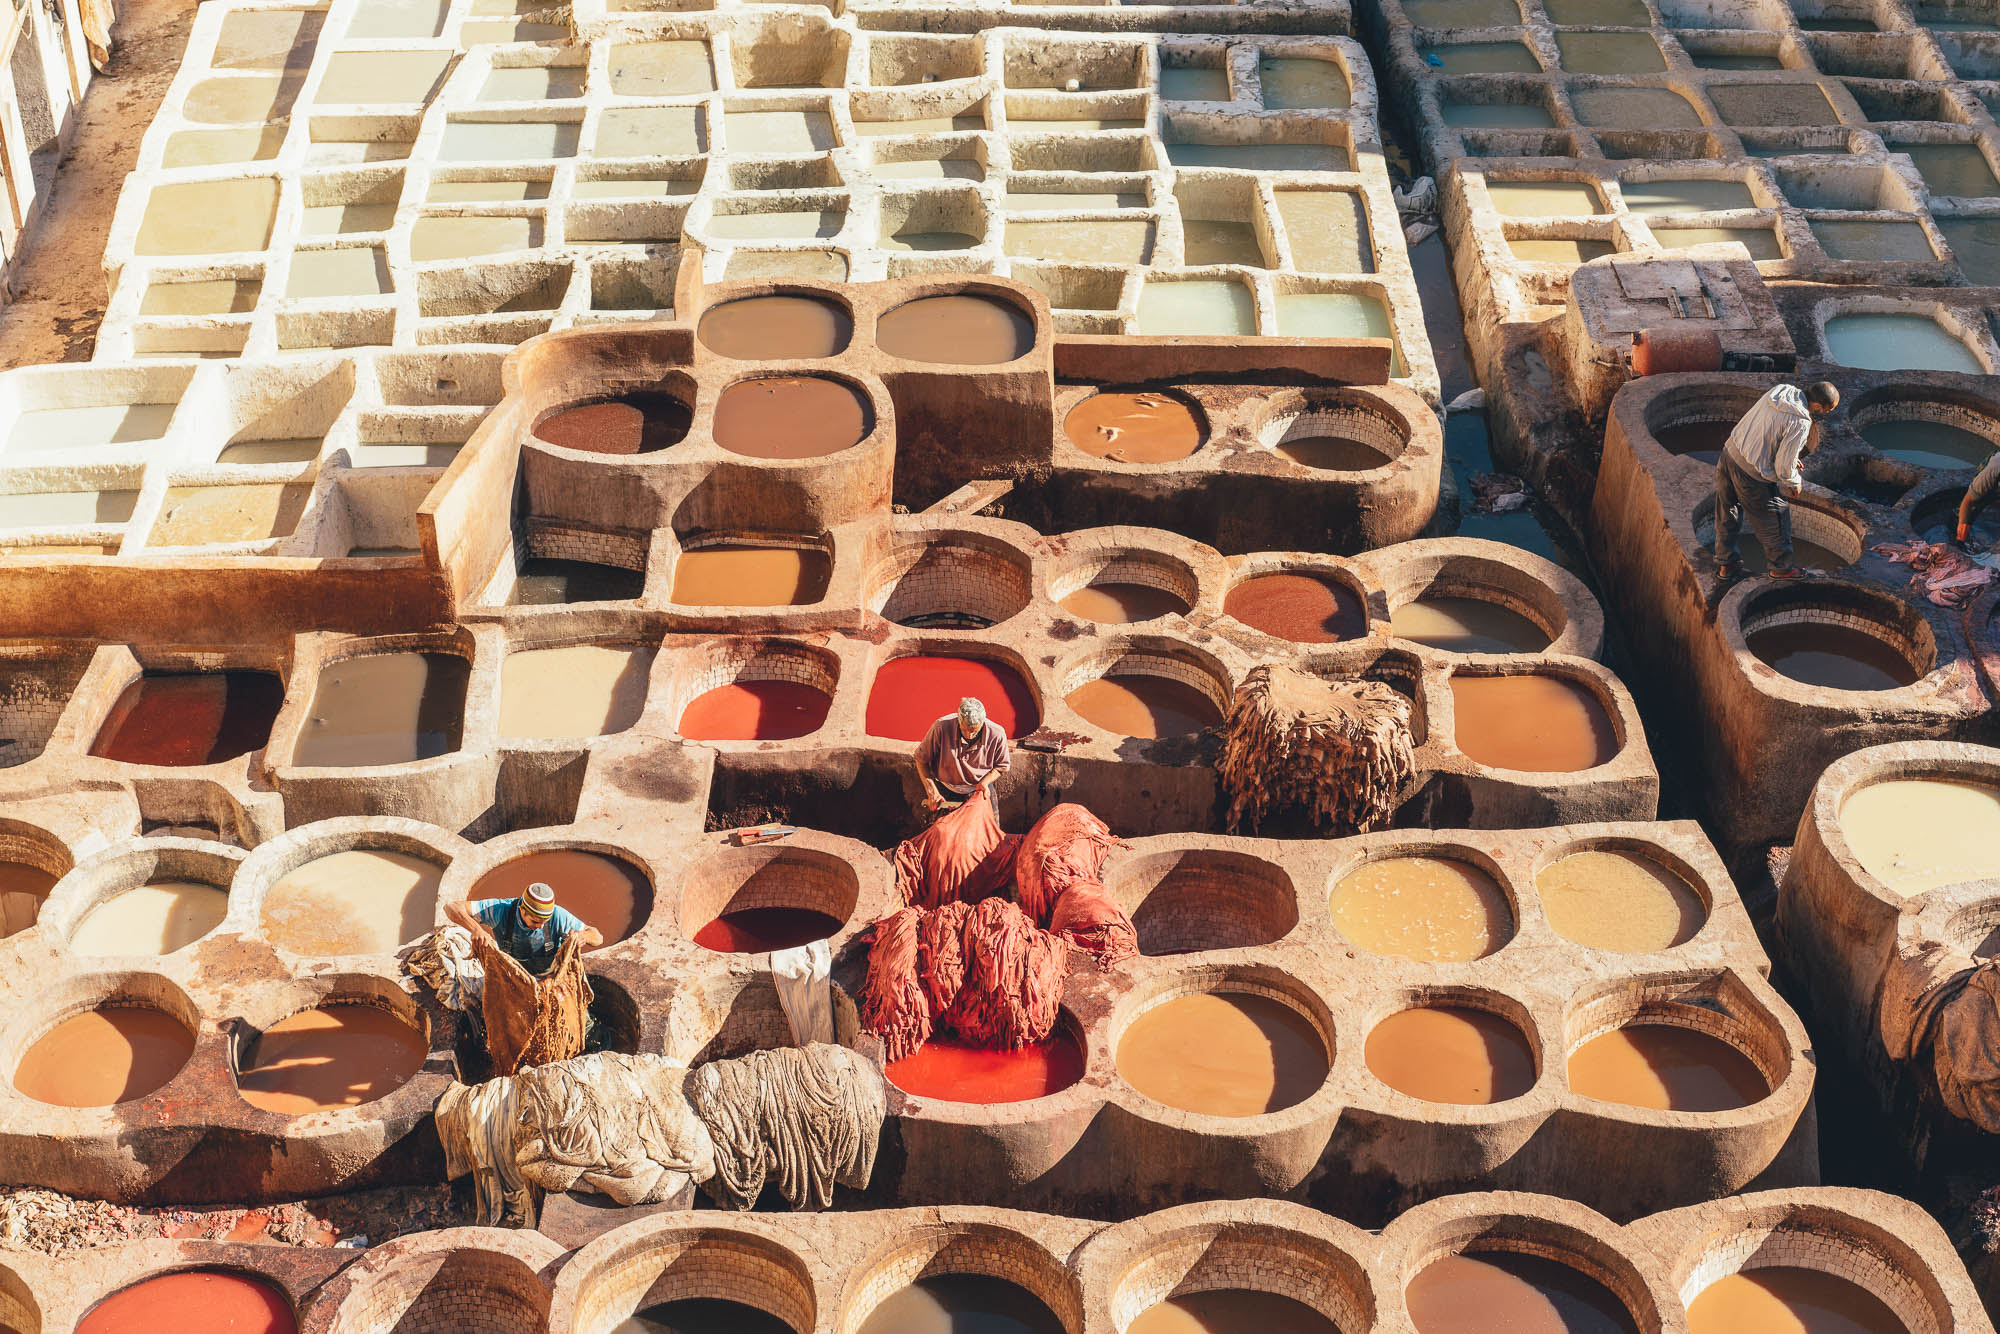 Moroccan Men working at the Tannerie Chouara in Fez, Morocco.